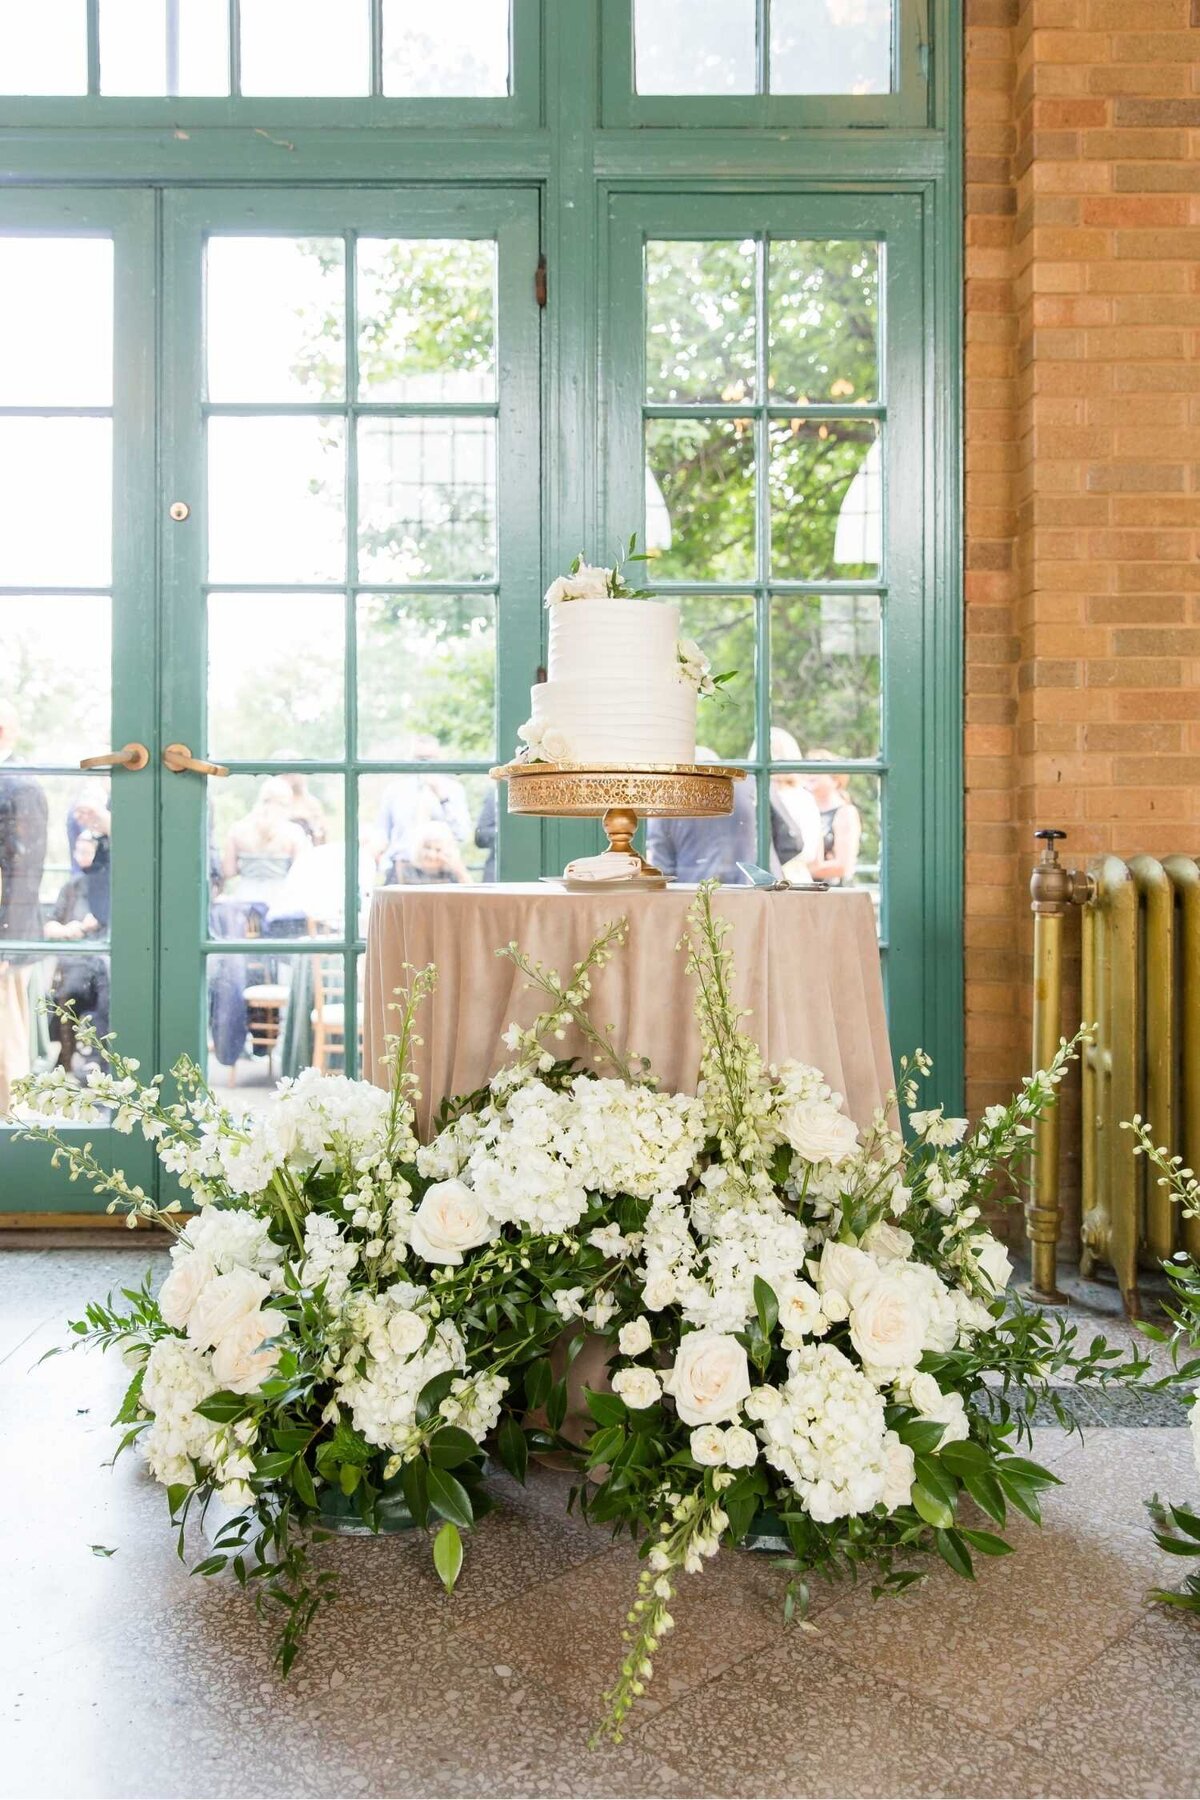 Cake table with lush floral encircling with white and green florals at Columbus Park Refectory at a Luxury Chicago Outdoor Historic Wedding Venue.